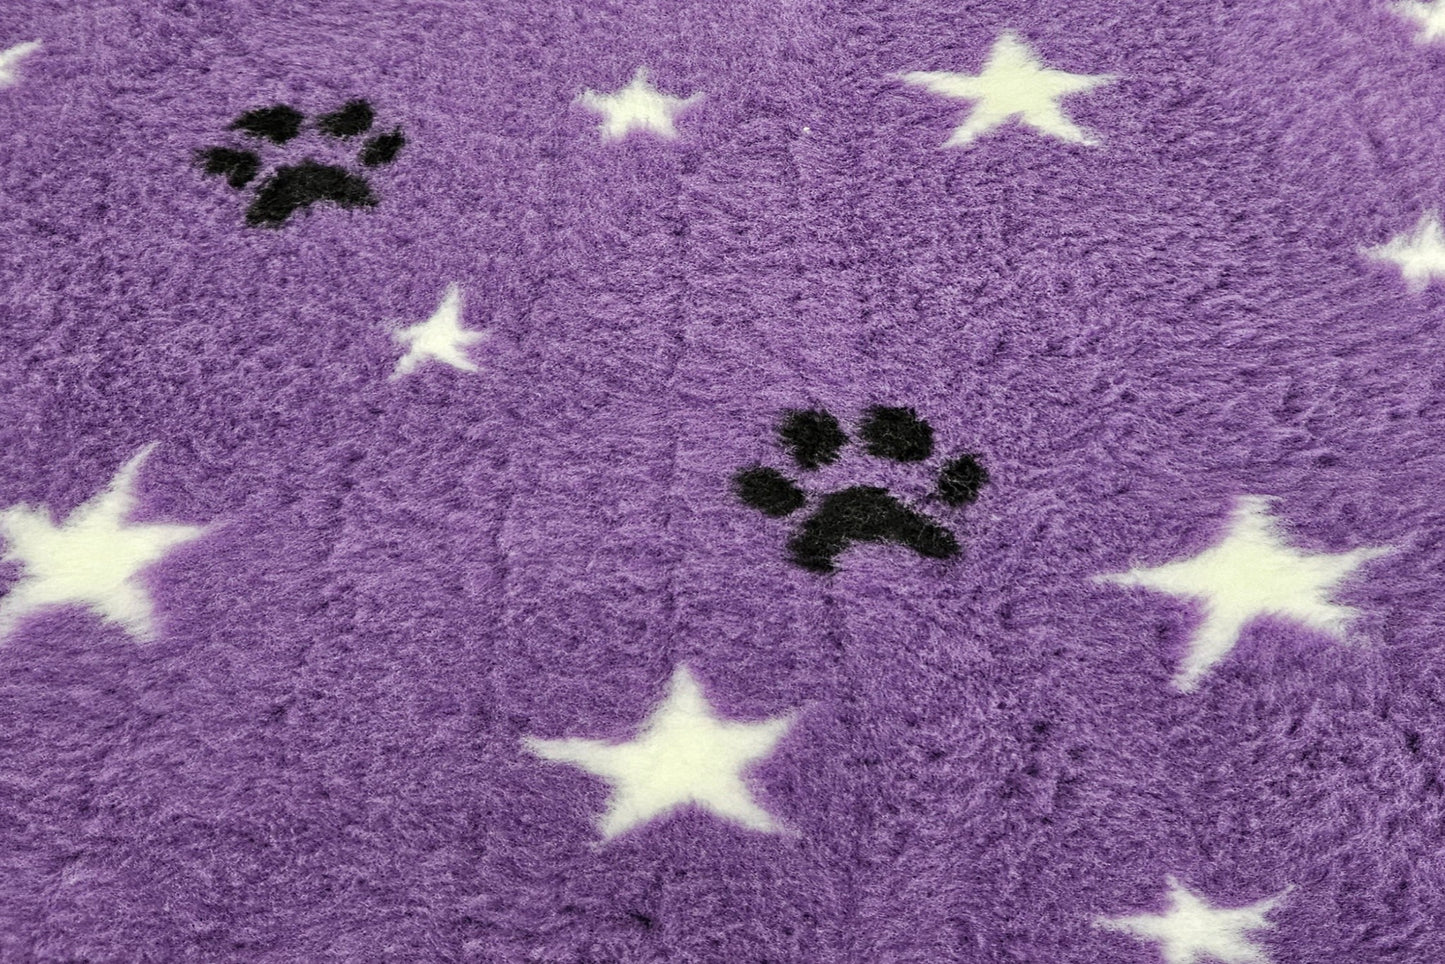 Vet Bed - No Backing - Purple with White Stars and Black Paws